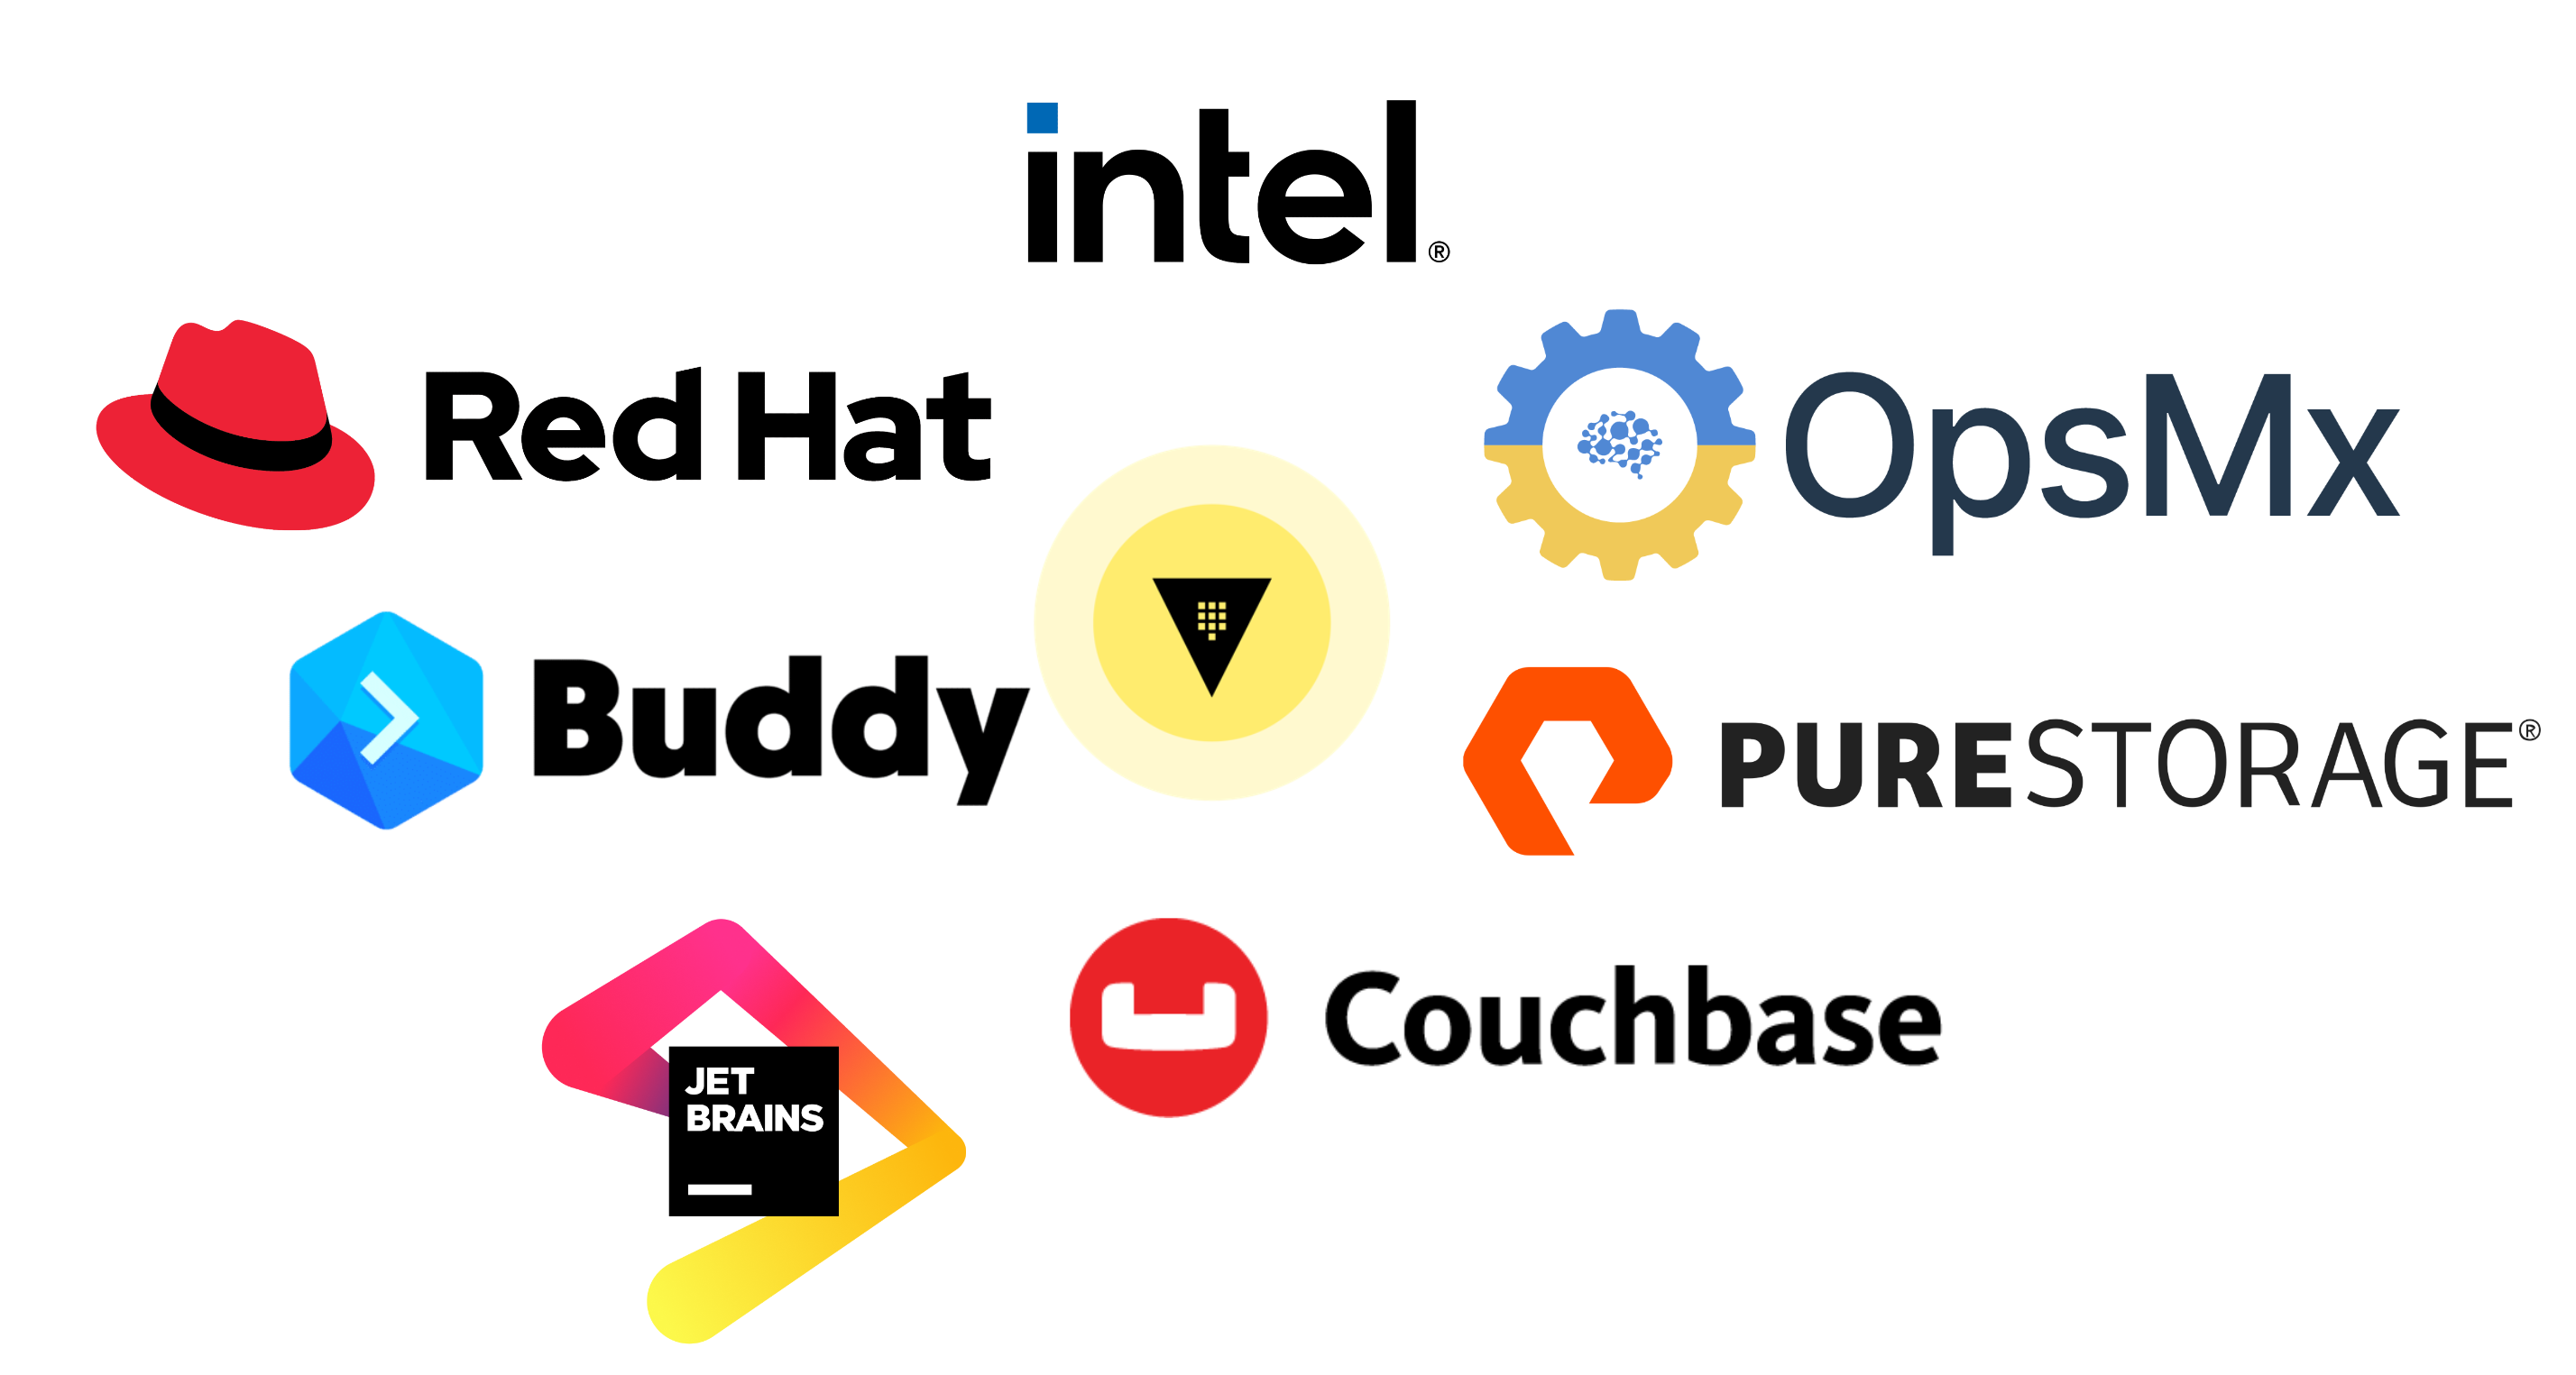 Vault integrations with Intel, Pure Storage, Red Hat, and more continue to strengthen customer security